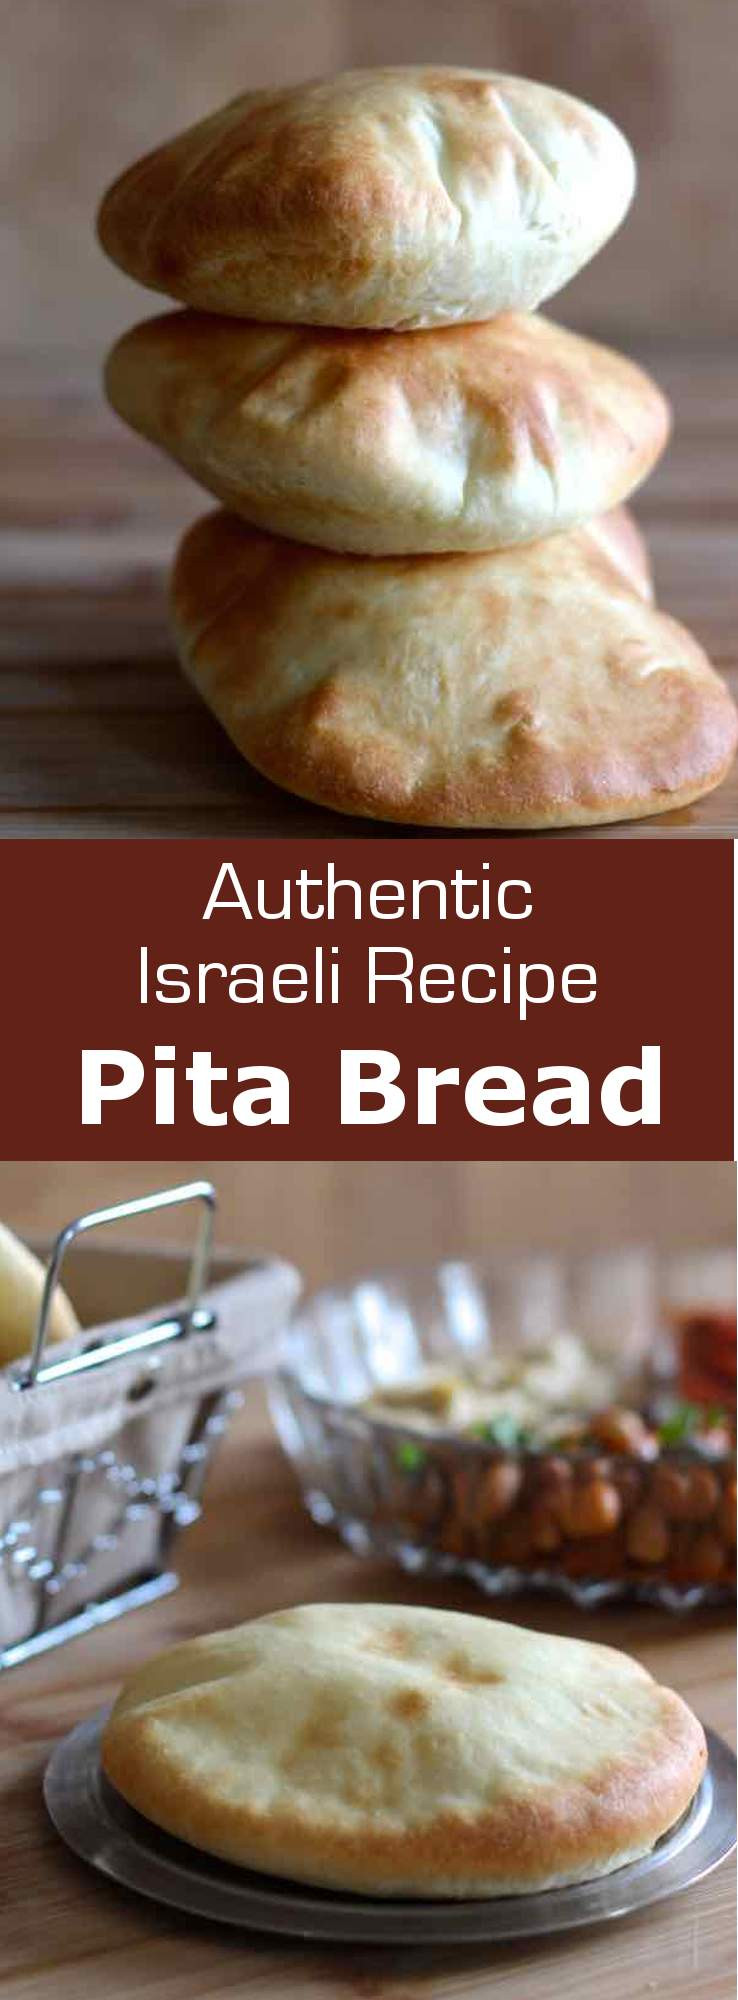 Middle Eastern Flat Bread Recipes
 Pita Bread Authentic Middle Eastern Recipe